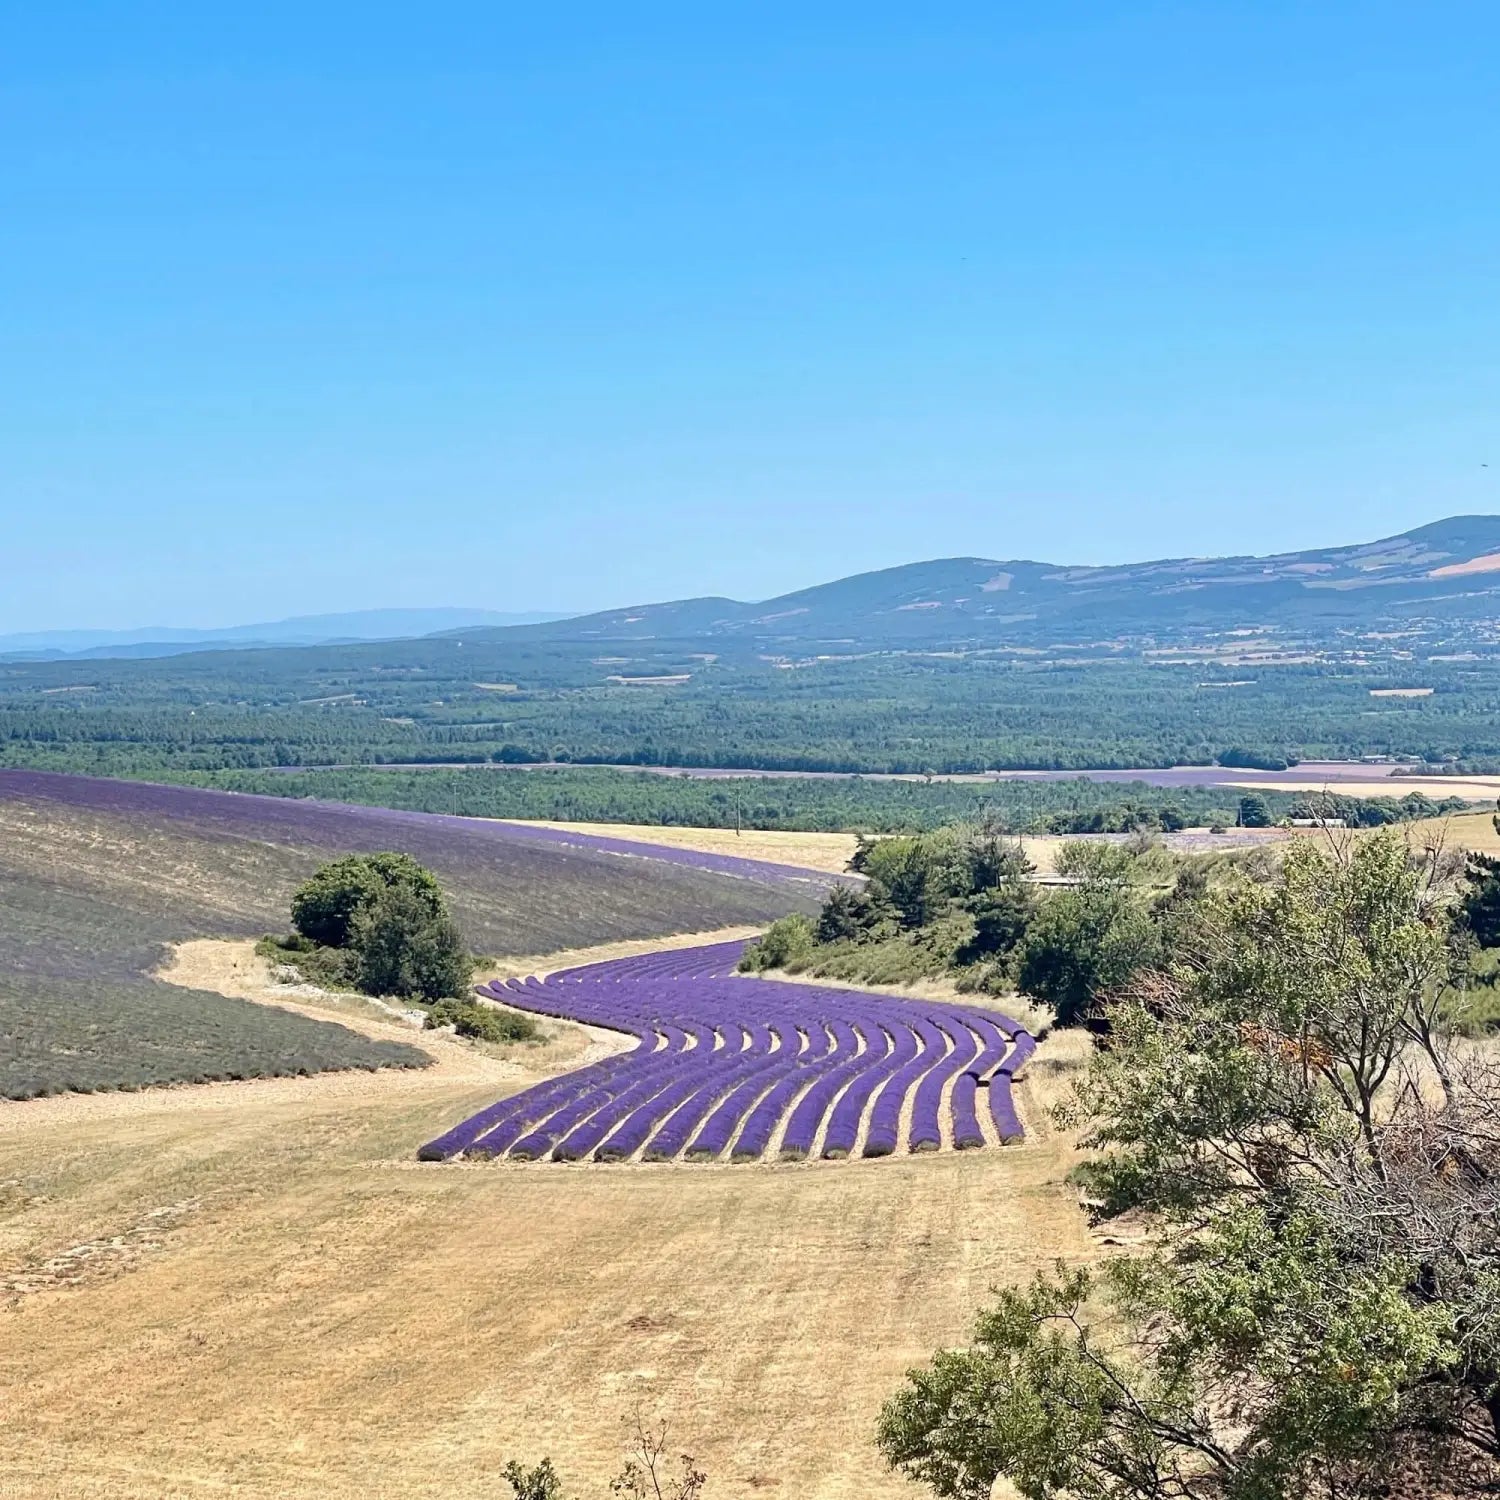 View of the lavender fields near Ferrassières